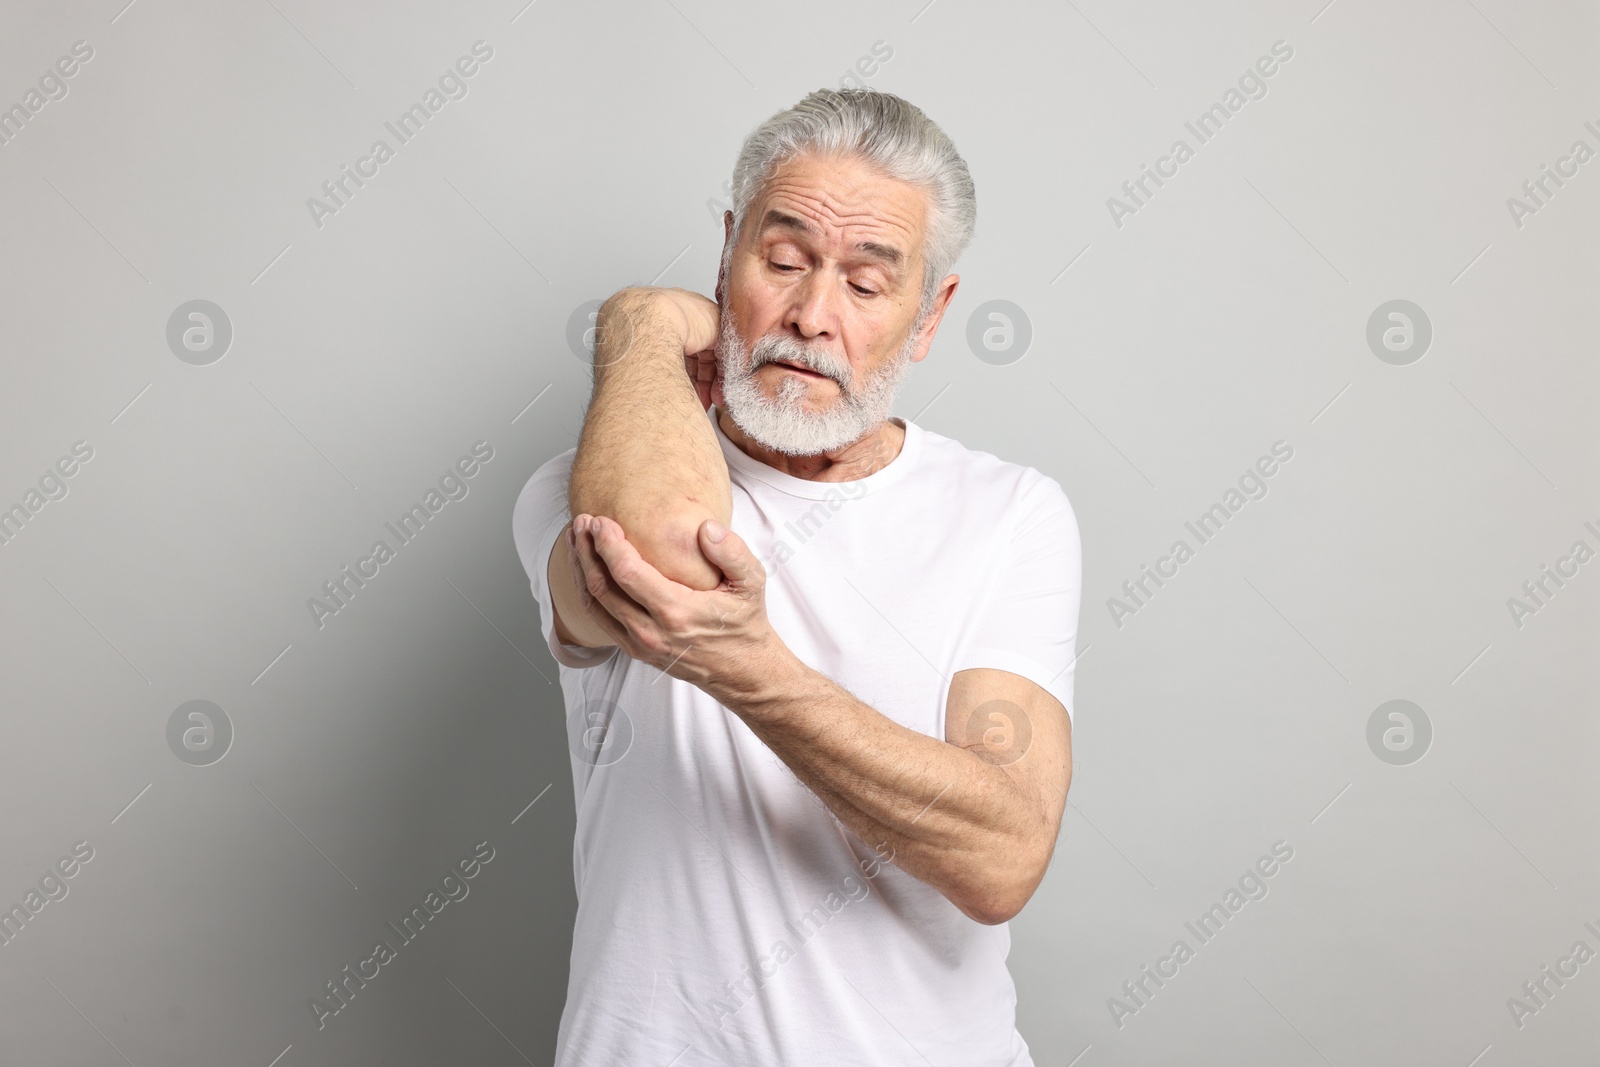 Photo of Arthritis symptoms. Man suffering from pain in elbow on gray background